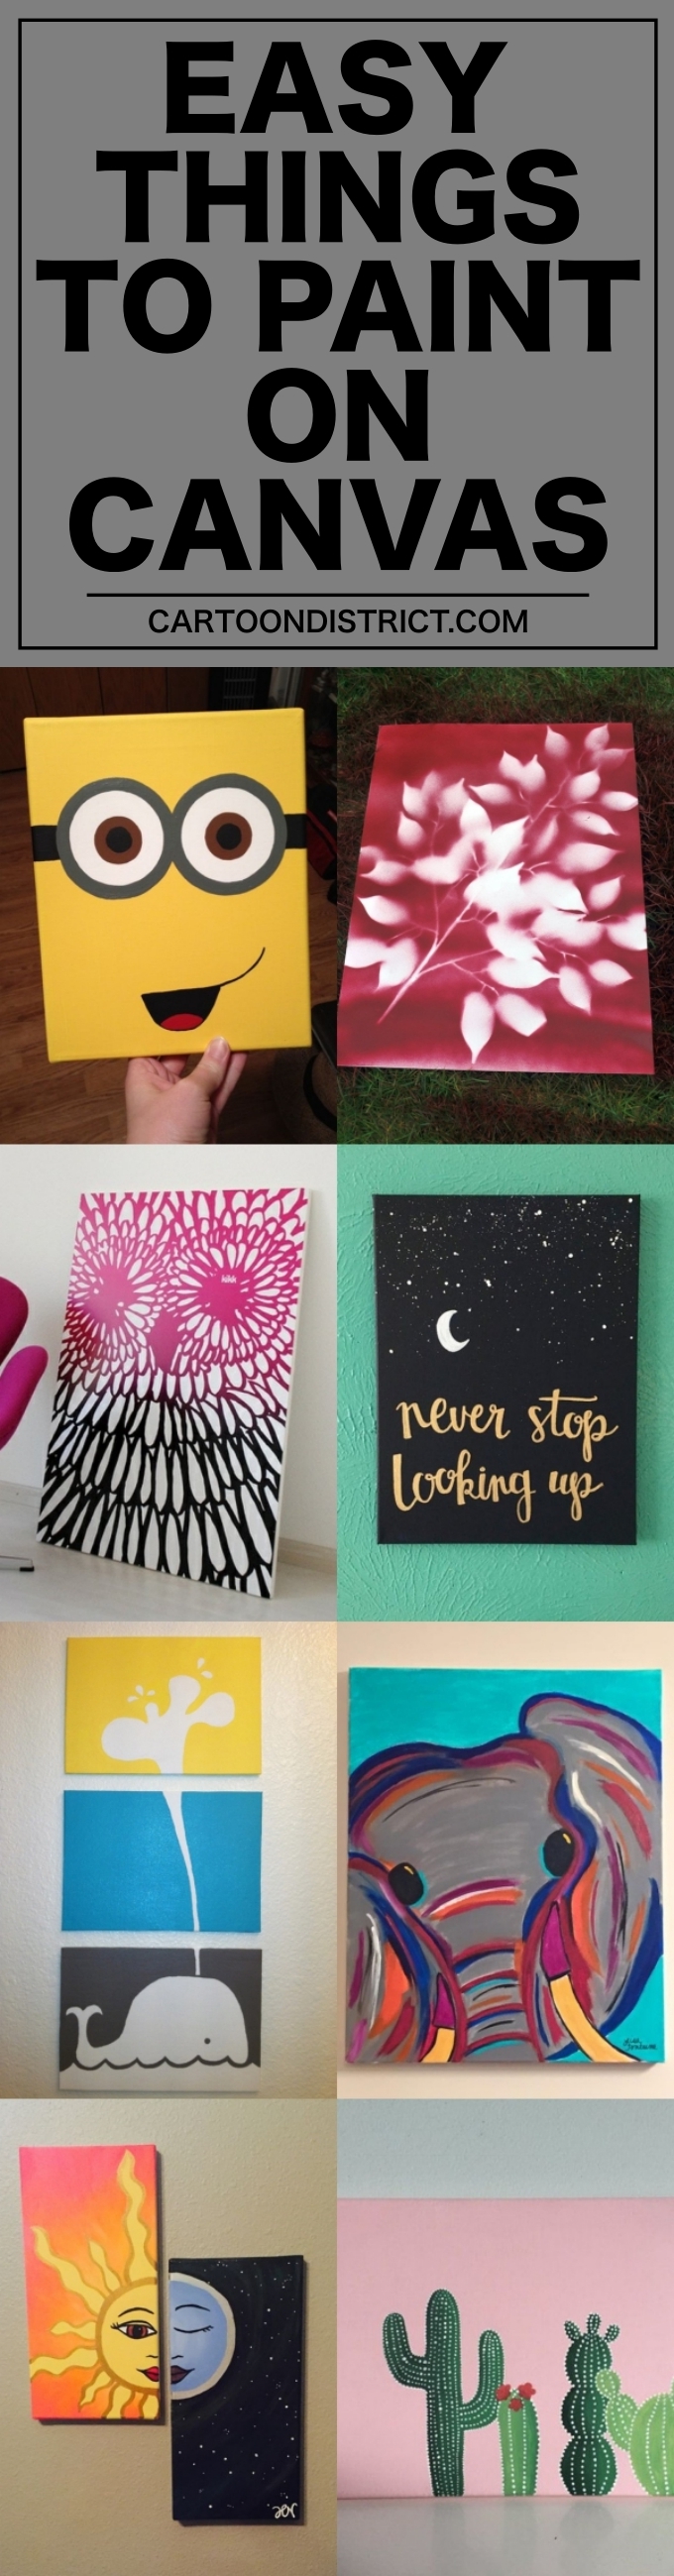 Easy Things to Paint on Canvas